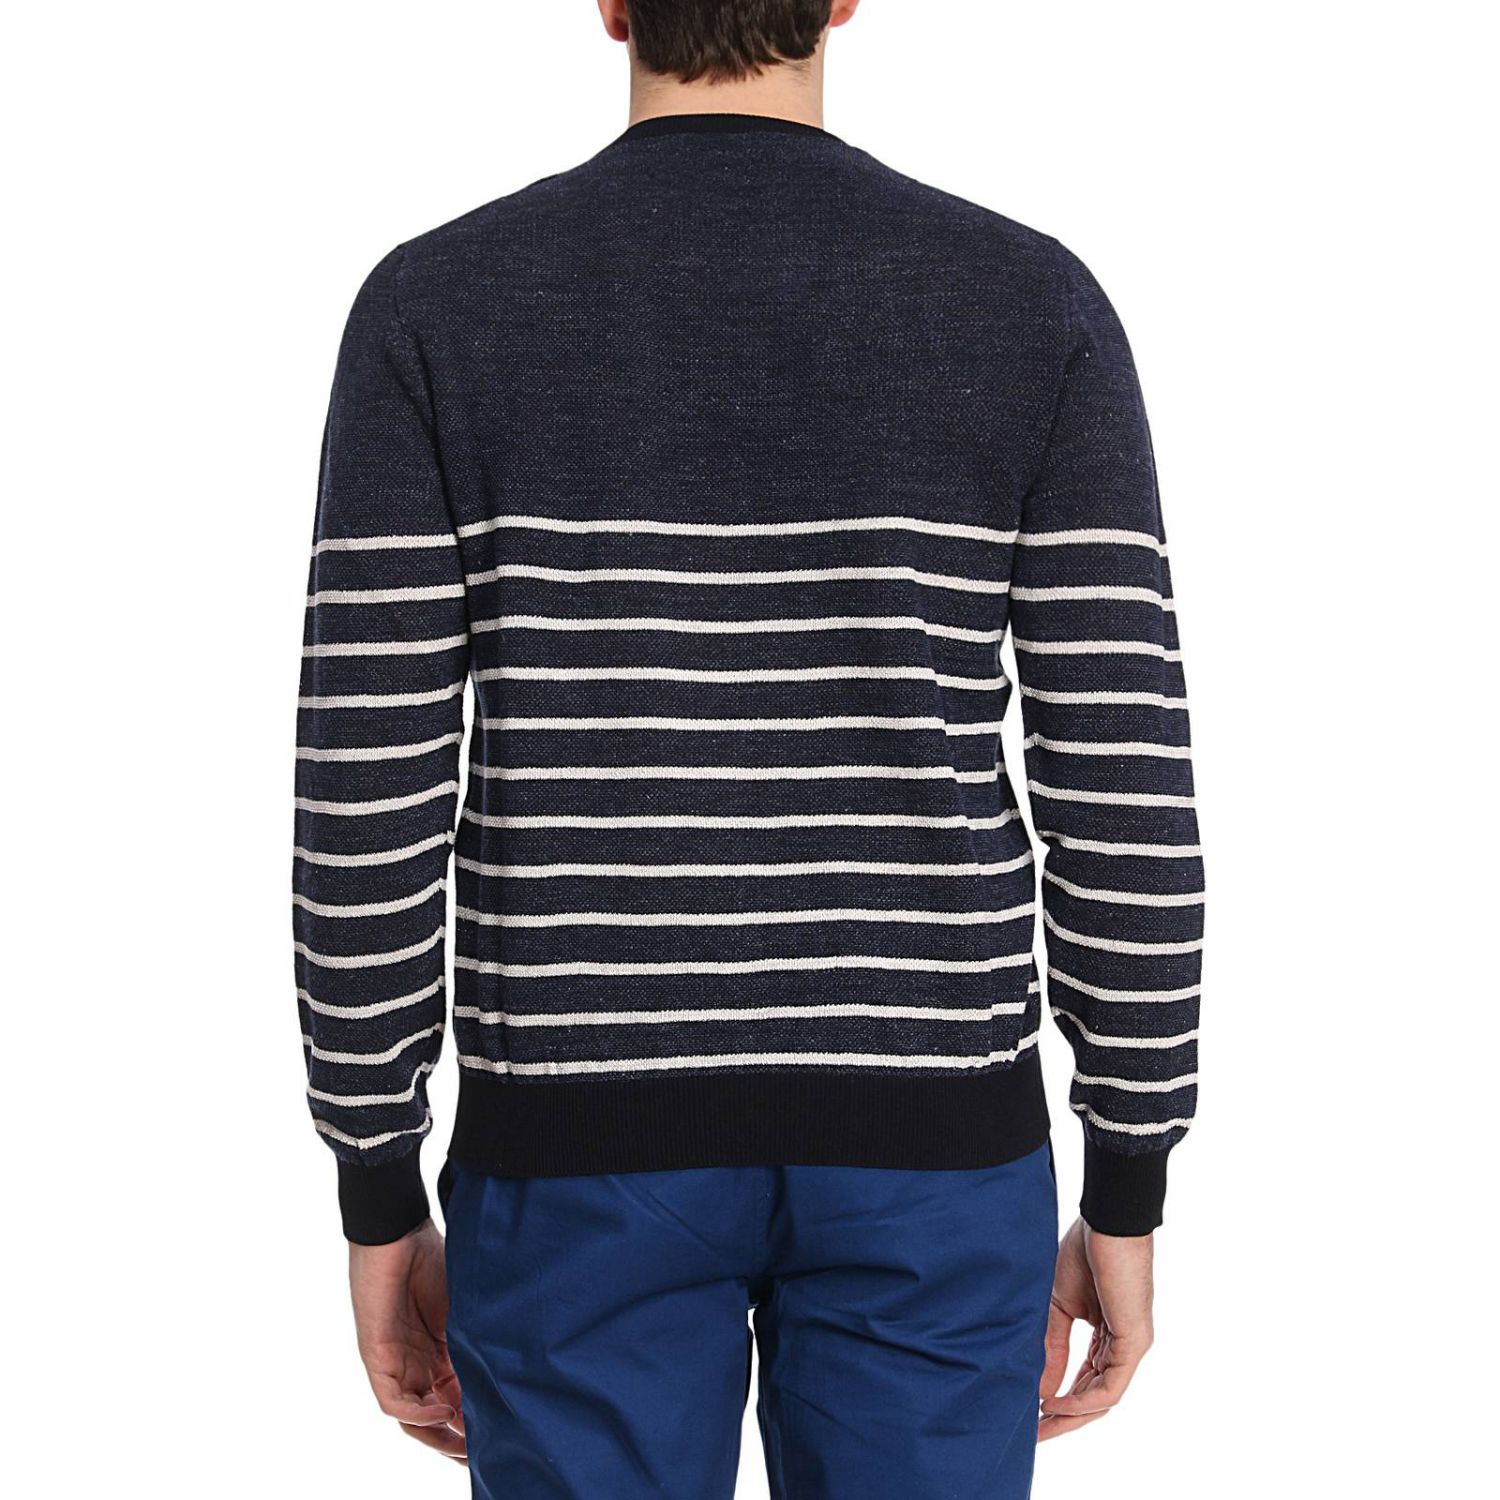 TODS: Sweater men Tod's | Sweater Tods Men Blue | Sweater Tods ...